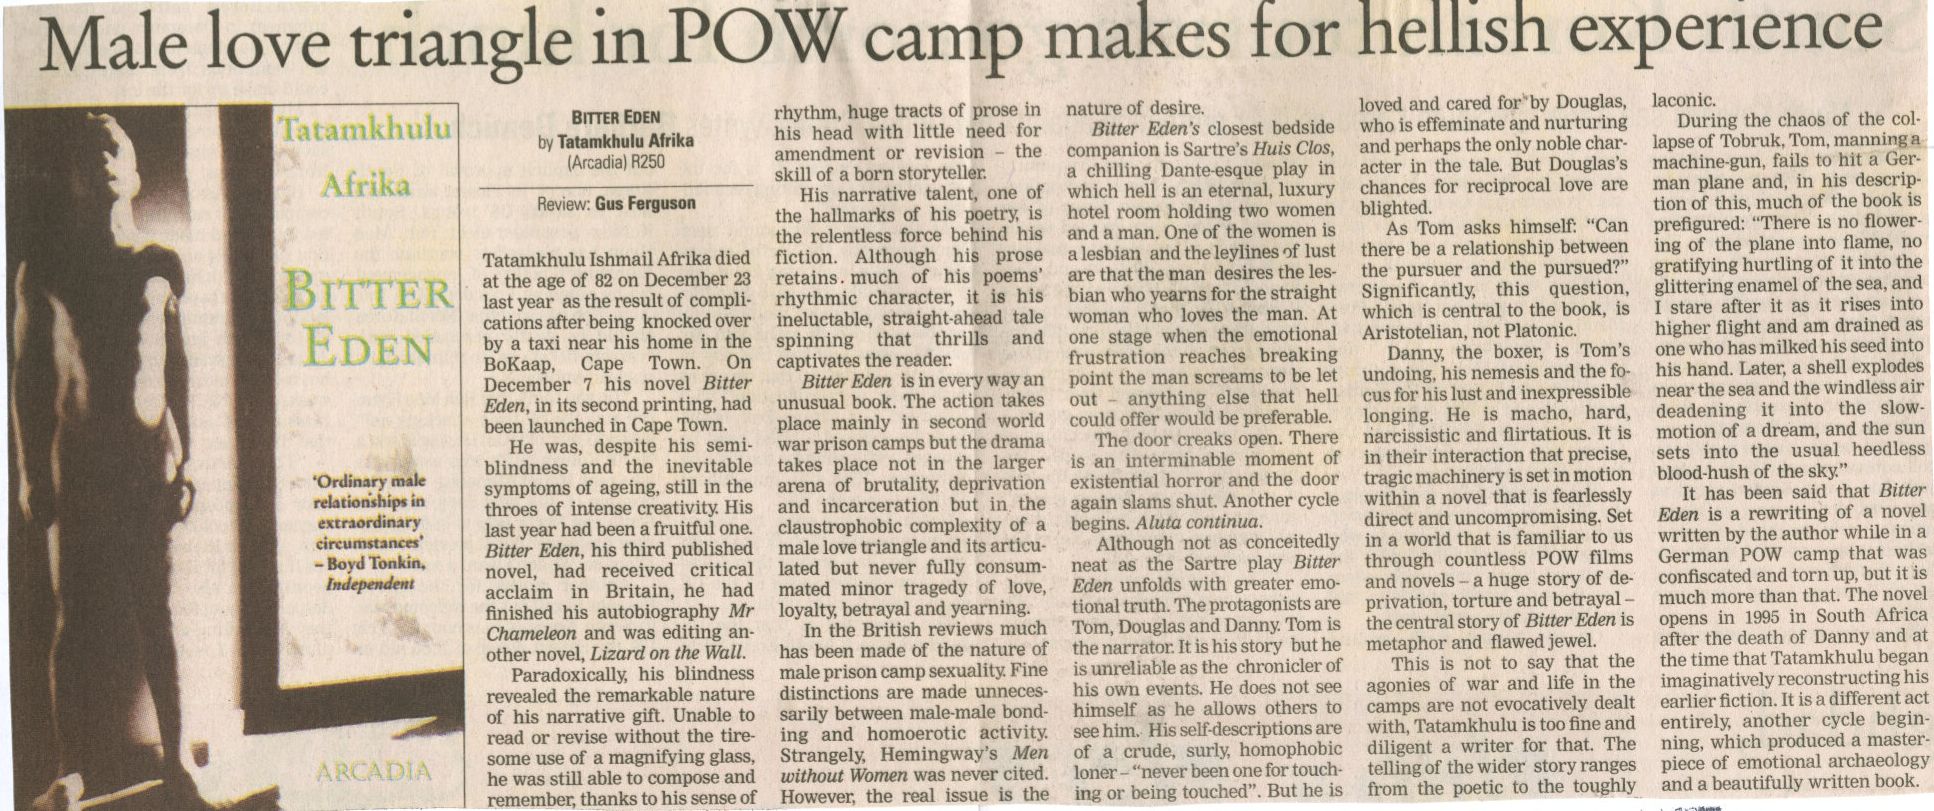 In a review of <i>Bitter Eden</i> in <em>The Sunday Independent</em> of 23 February 2003, Gus Ferguson significantly describes the main character, Tom, as one who “does not see himself as he allows others to see him”. The novel is based on Afrika’s prisoner of war experience.